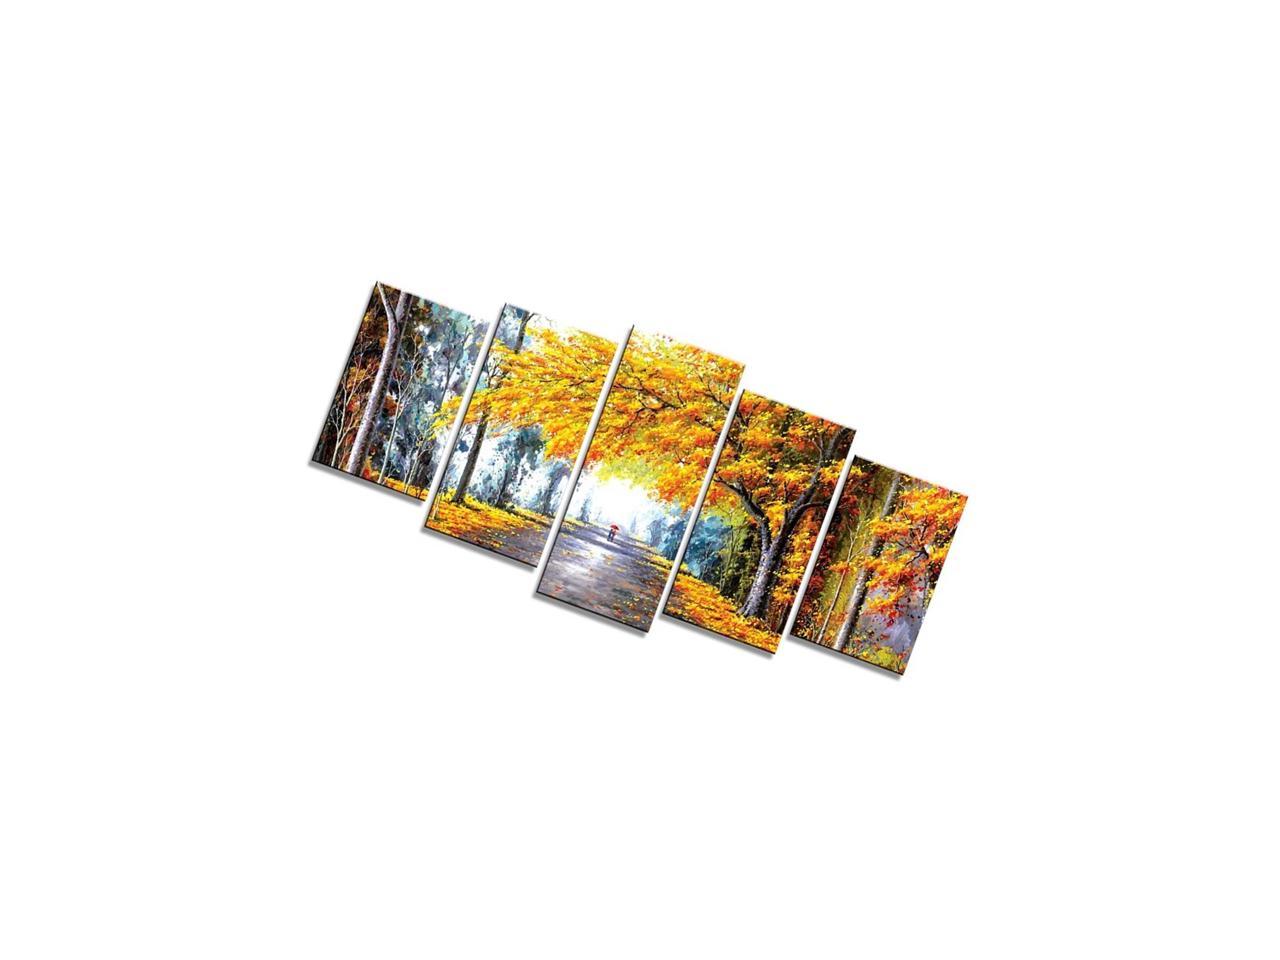 canvas wall art Autumn Love Modern Framed Giclee Canvas Prints Abstract Landscape Forest Oil Paintings Reproduction Pictures Photo Printed on Canvas Wall Art work for Bedroom Home Decorations youkiswall art hs0069zfh 